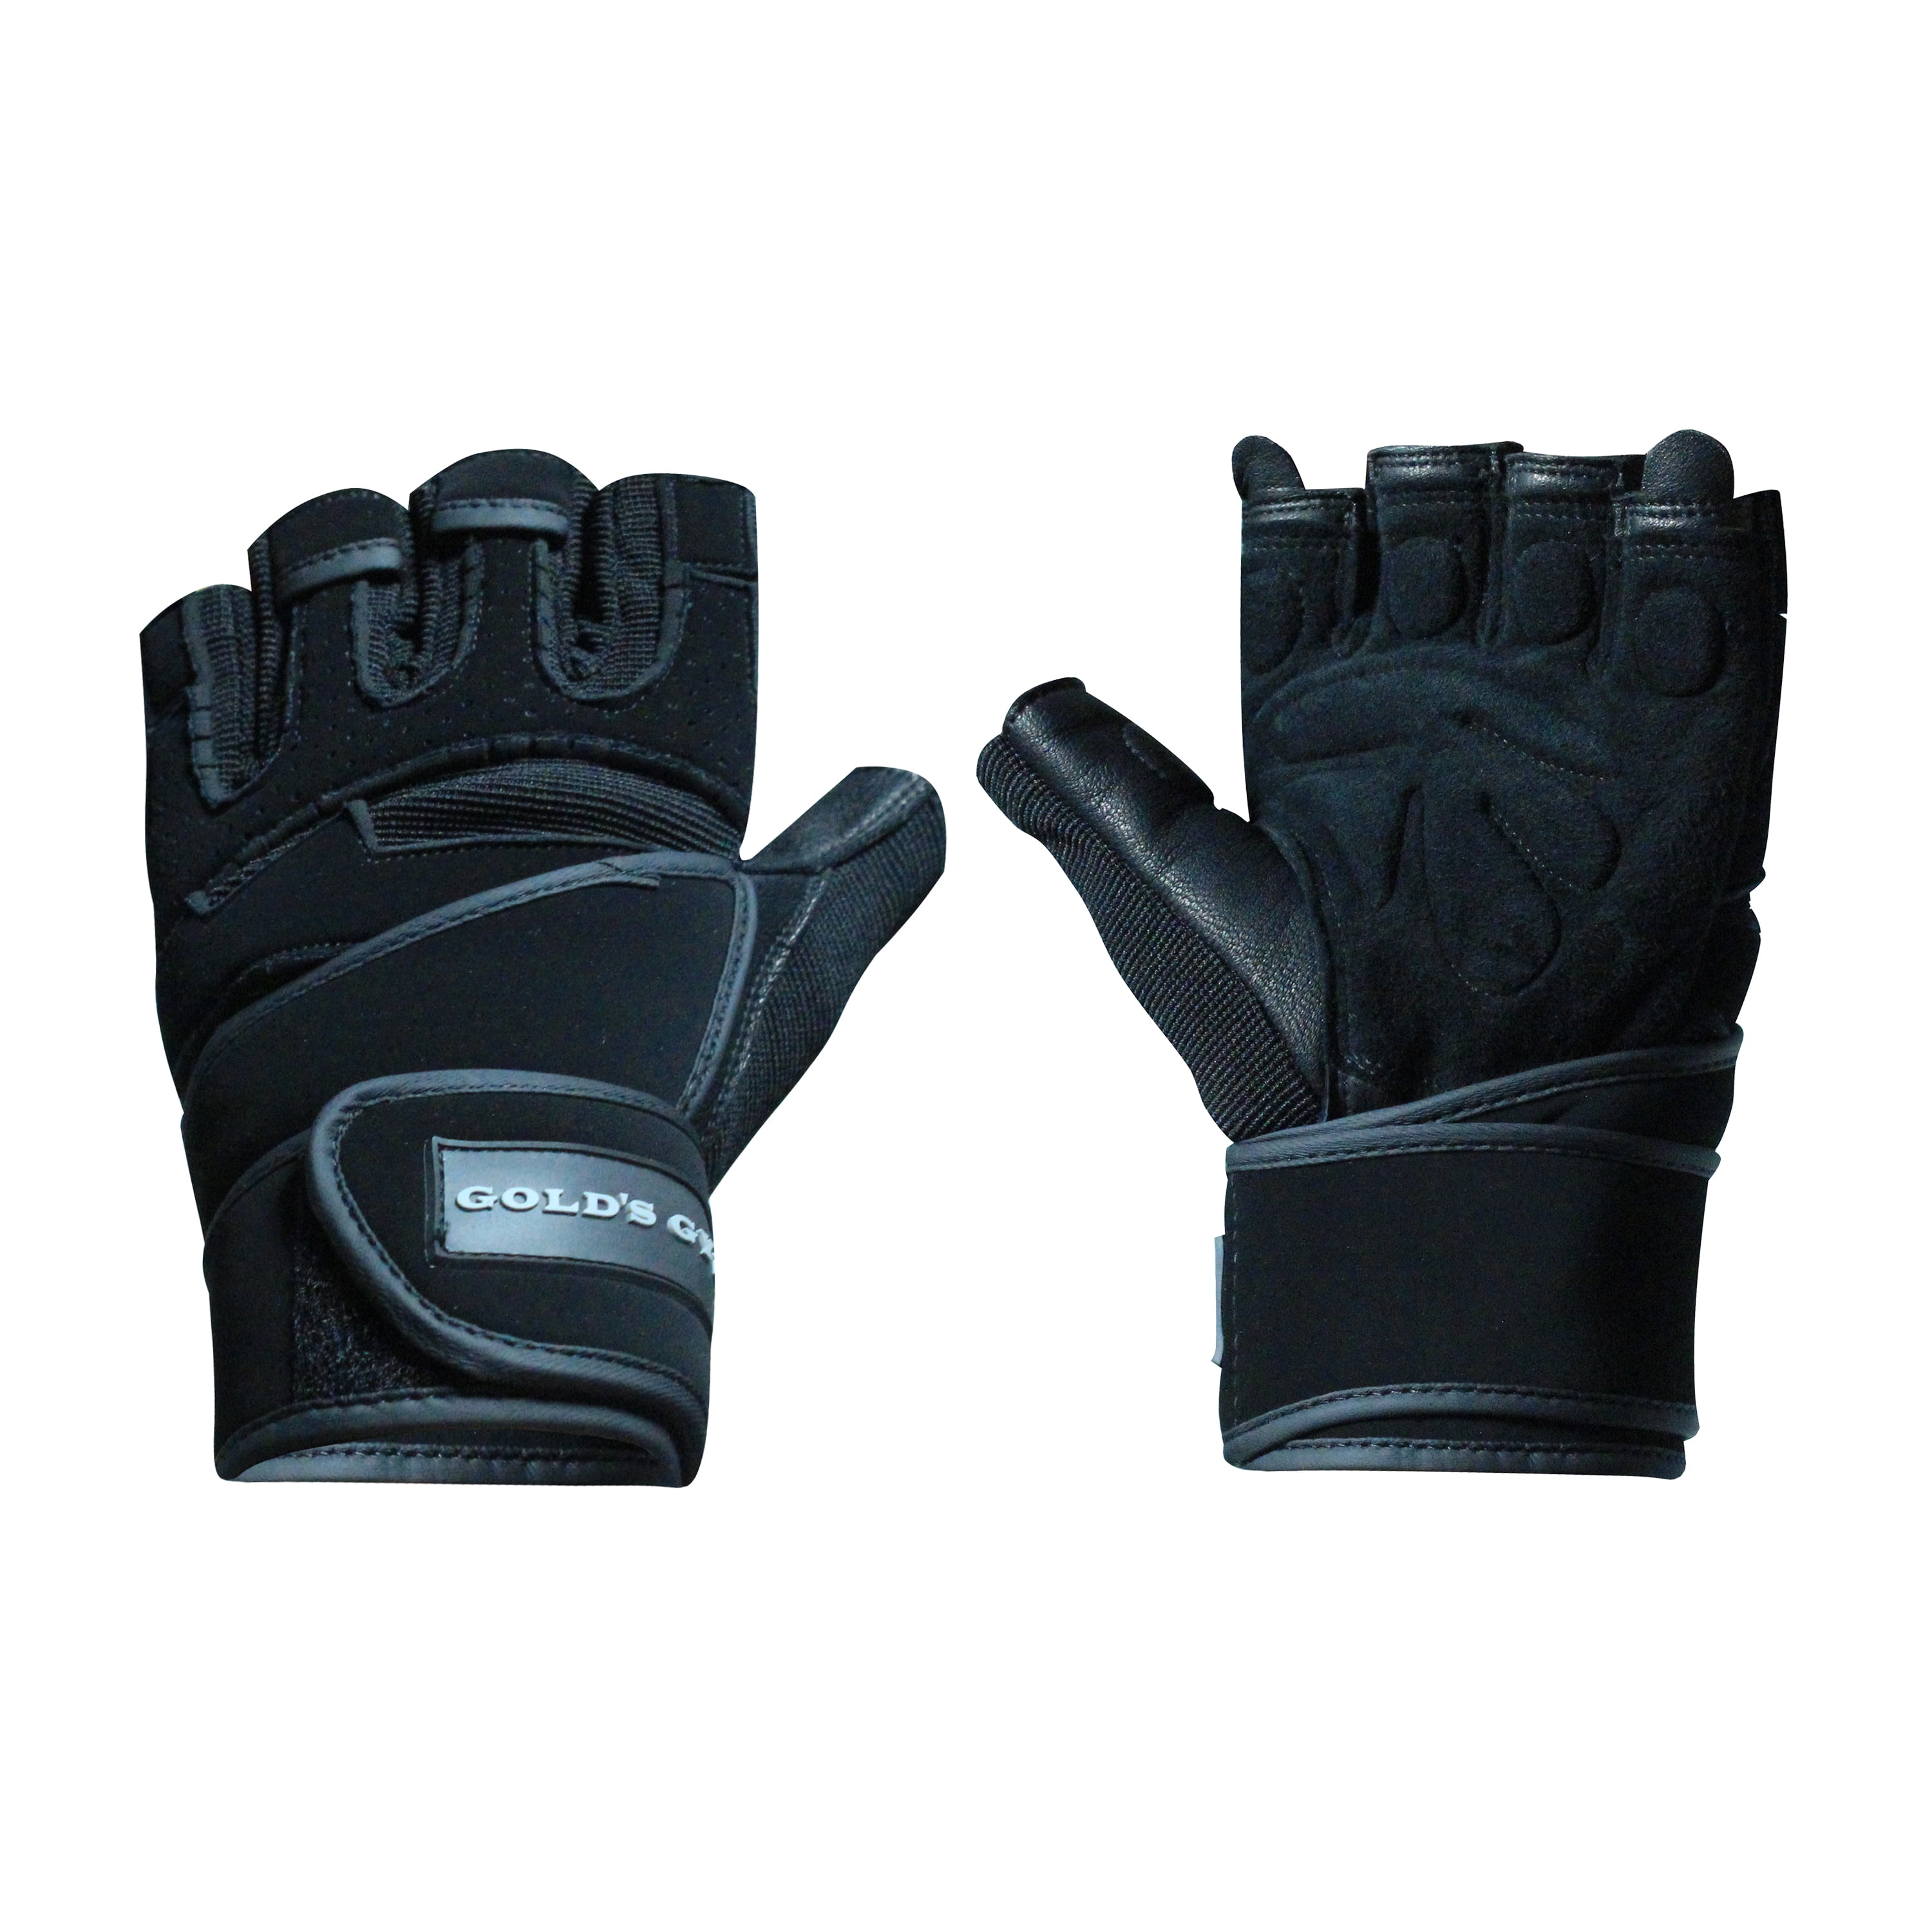 Gold's Gym Men's Tacky Gloves Half-finger Weight Lifting L/XL 